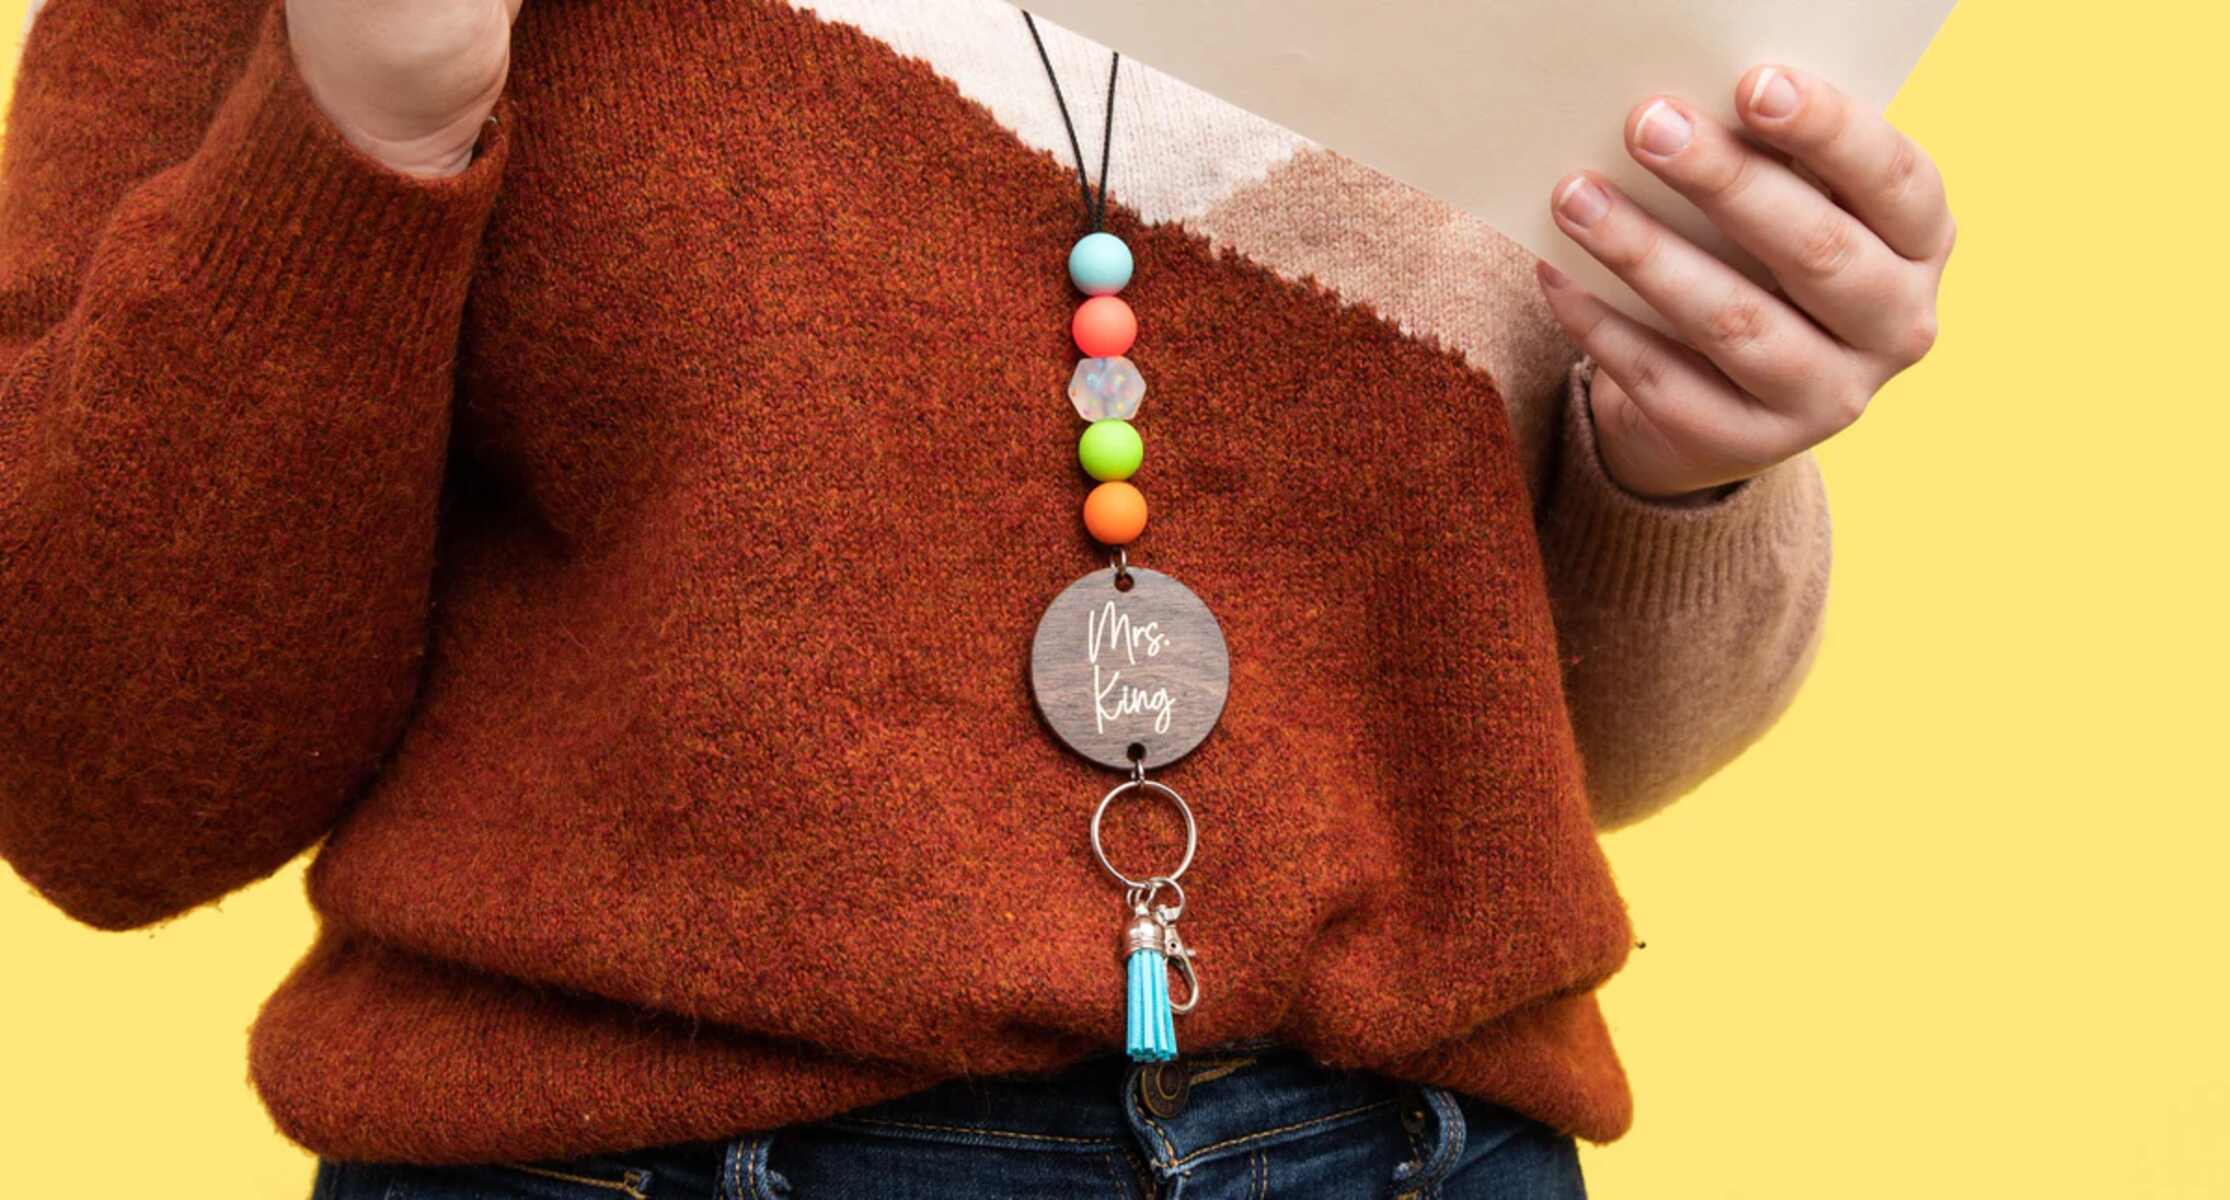 Crafting Stylish Neck Lanyards With Step-by-Step Instructions